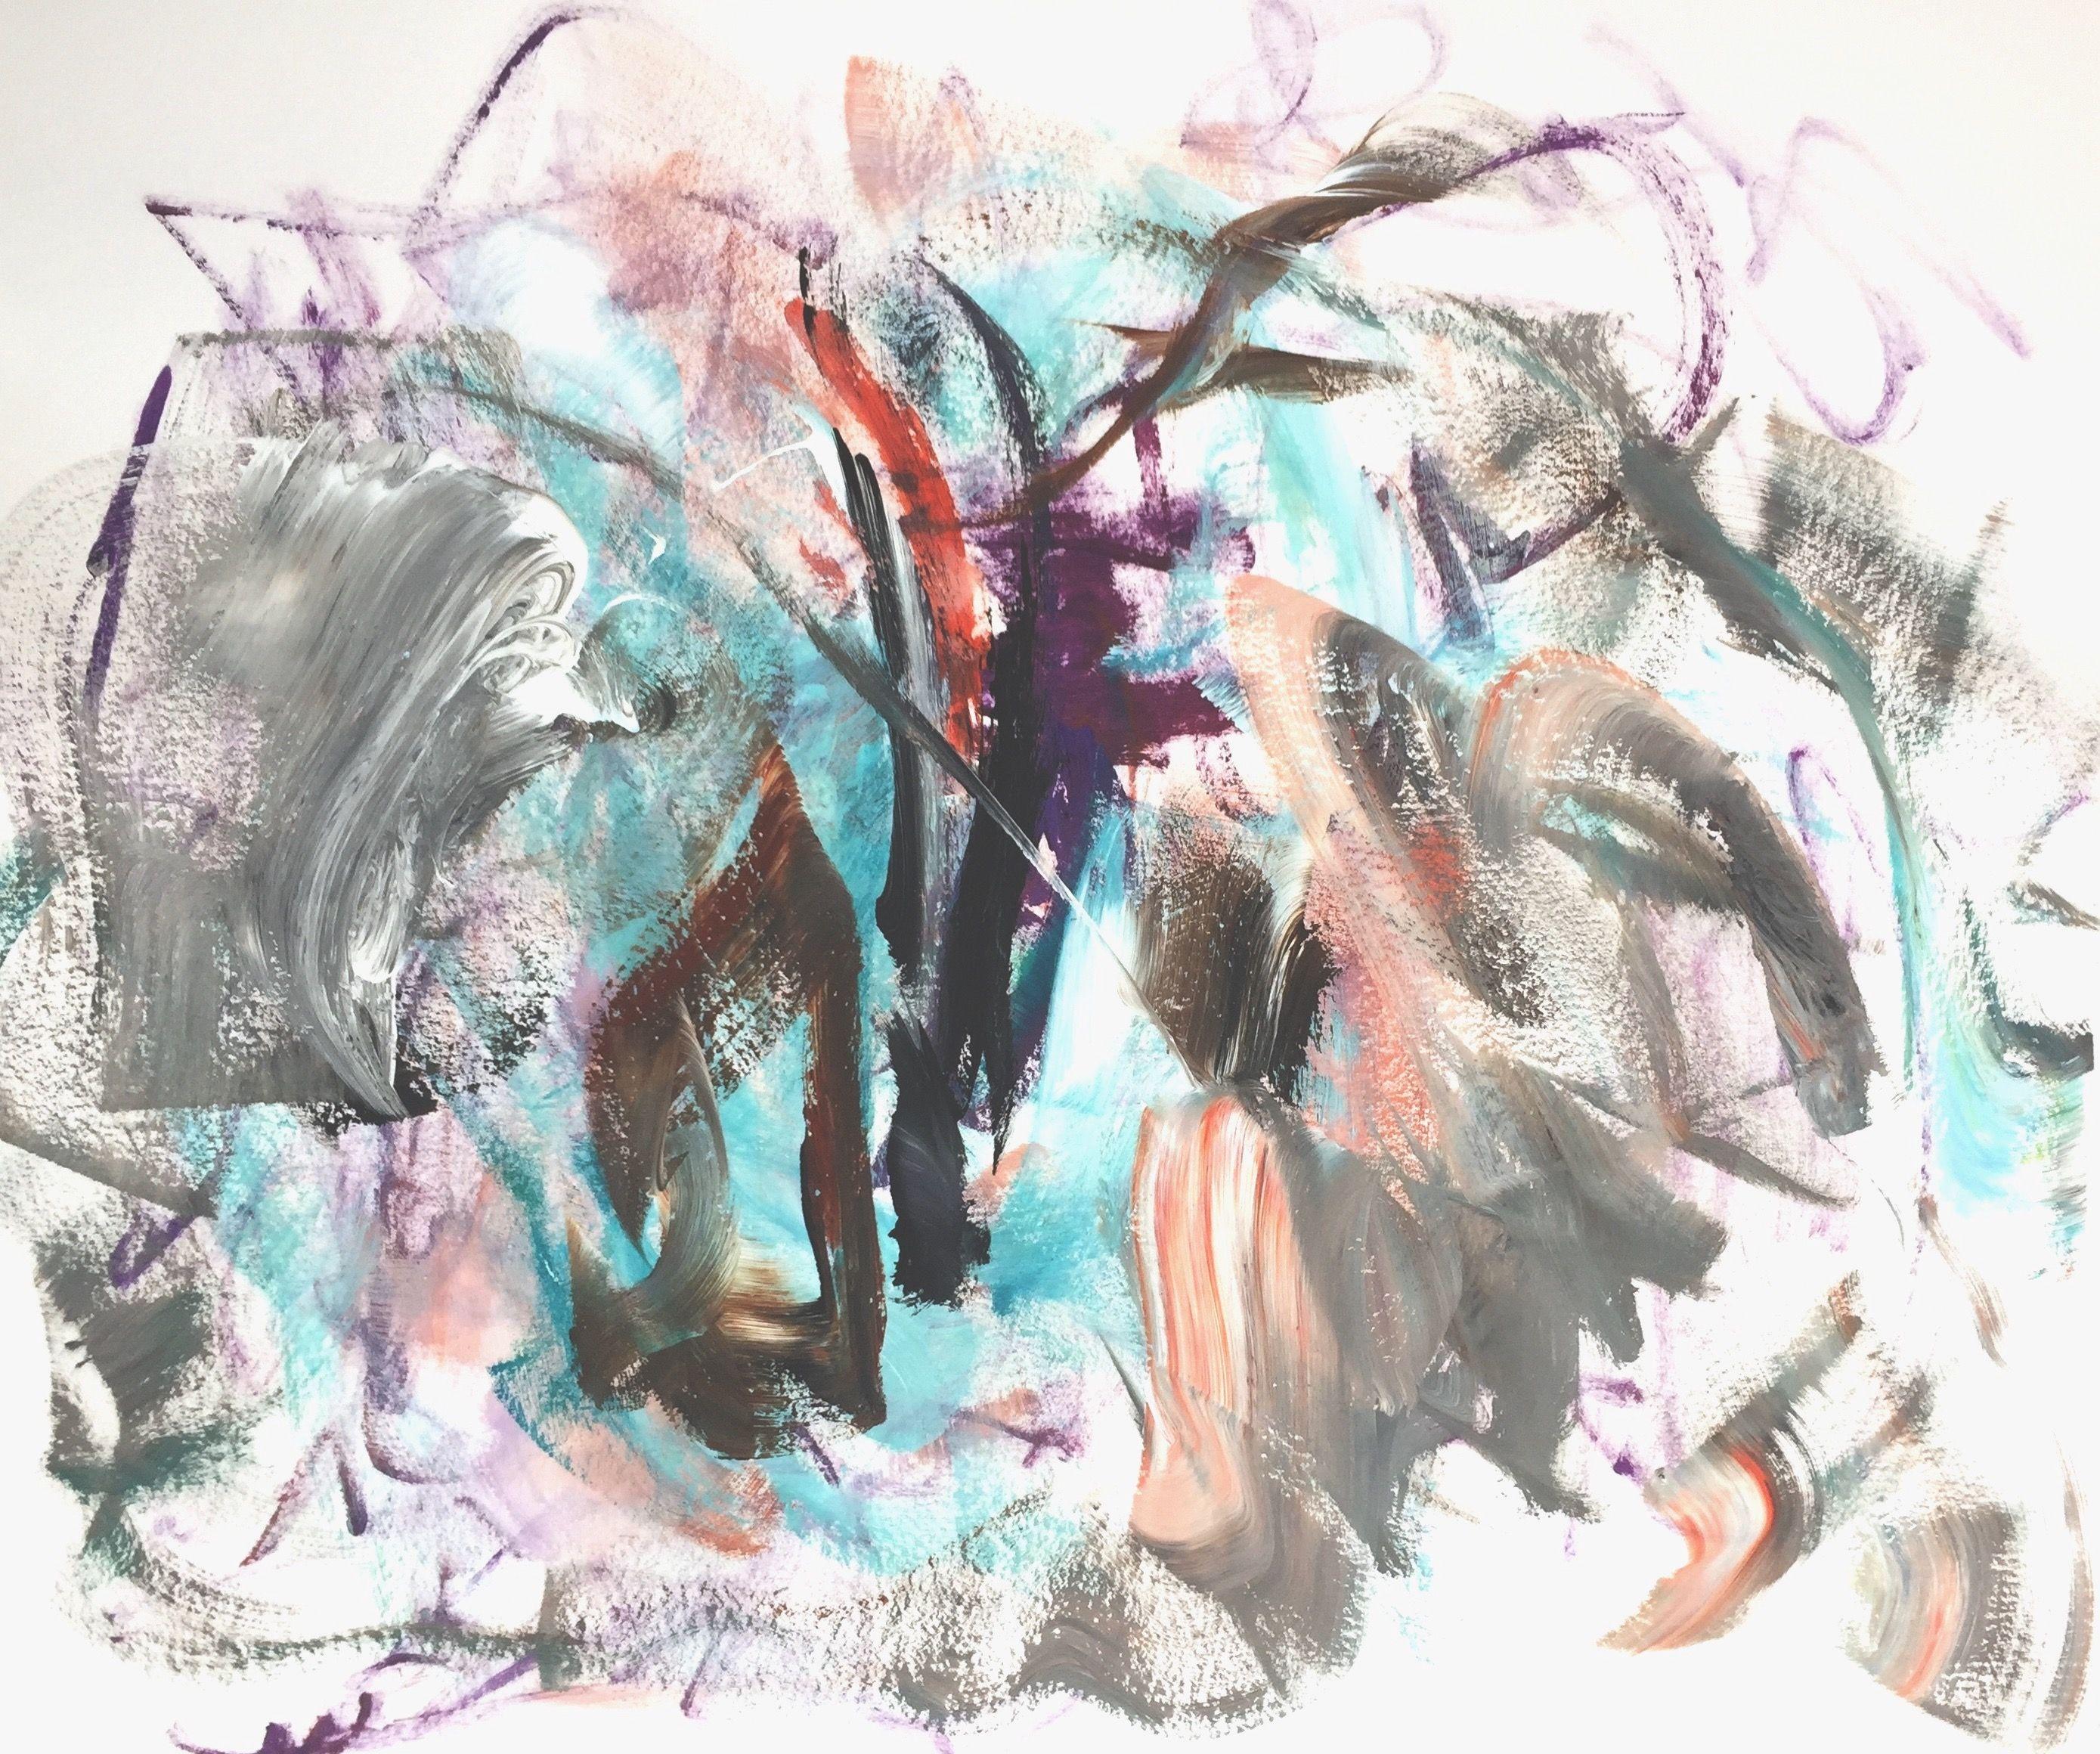 "Better Tomorrow" is a gestural-dynamic acrylic painting on paper. It is done in pastel tones. The main colors are gray, white, pink, mint green and purple. -  Sometimes it is necessary, but it is not always better to postpone things until tomorrow.